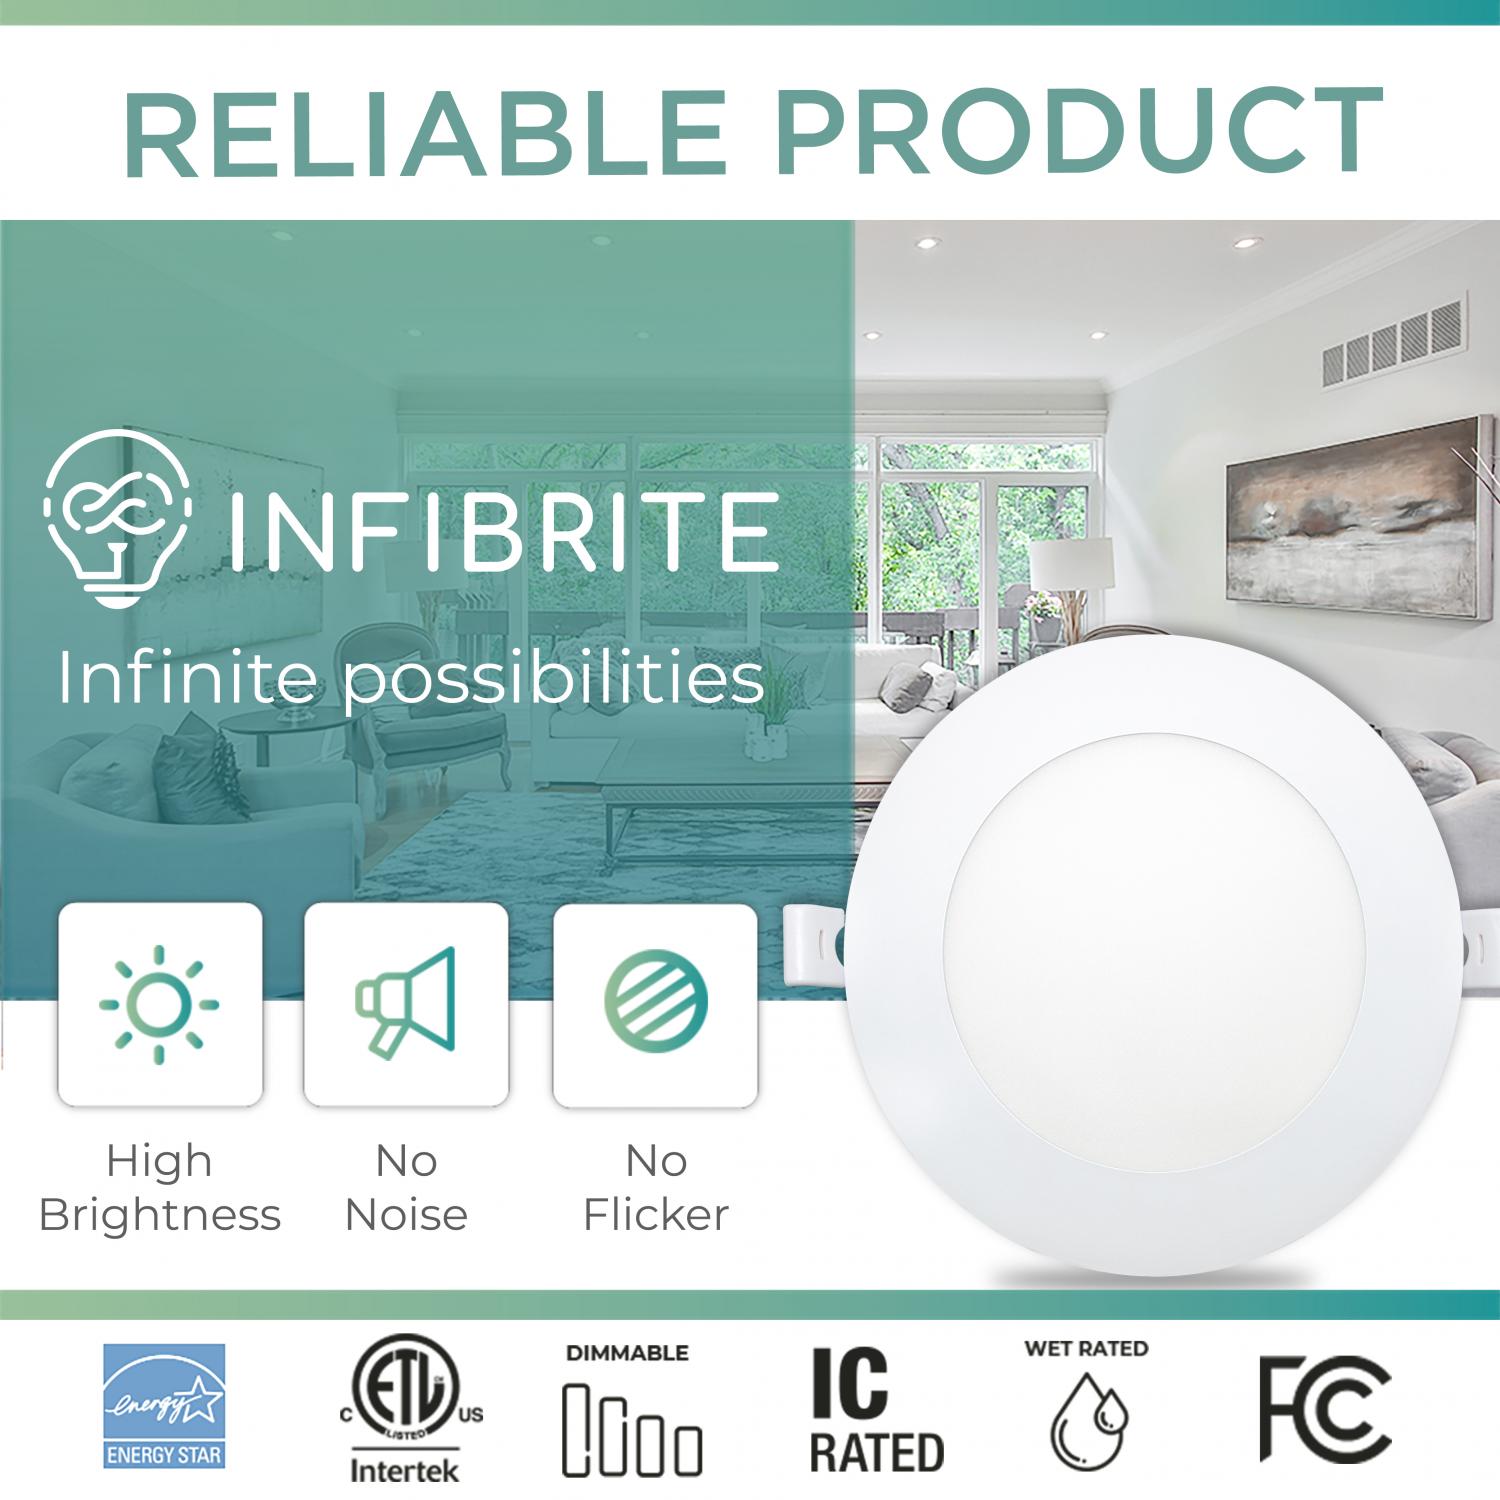 Infibrite 4 Inch 2700K/3000K/3500K/4000K/5000K Selectable 9W 750 LM Ultra-Slim LED Ceiling Light with Junction Box, Flush Mount, Dimmable, Fixture for Bedroom, Wet Rated for Bathroom, Easy Install, 75W Eqv, ETL & Energy Star, US Company (12 Pack)